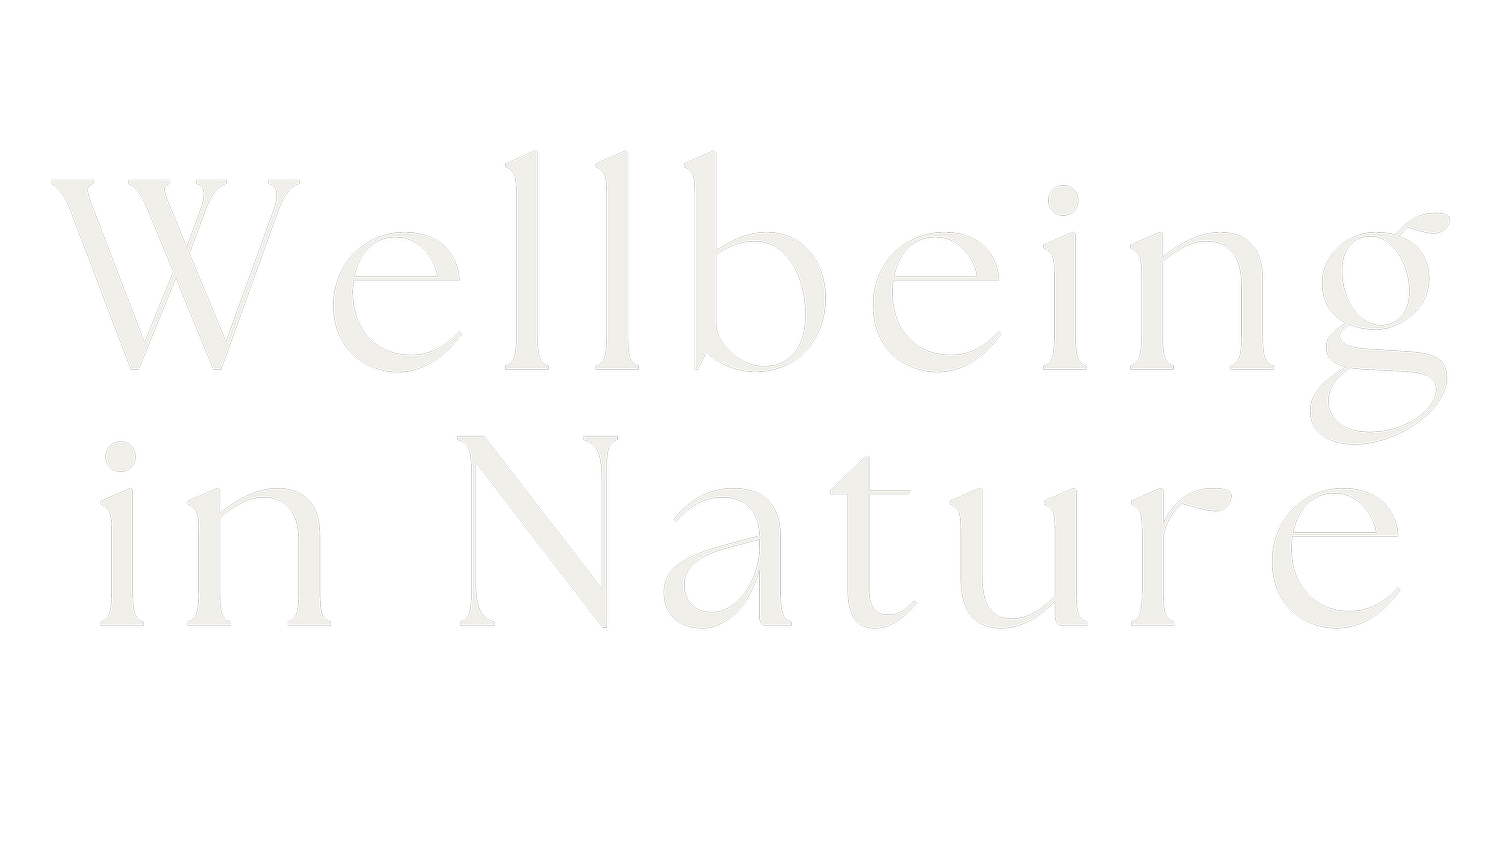 Wellbeing in Nature by Amy Steadman